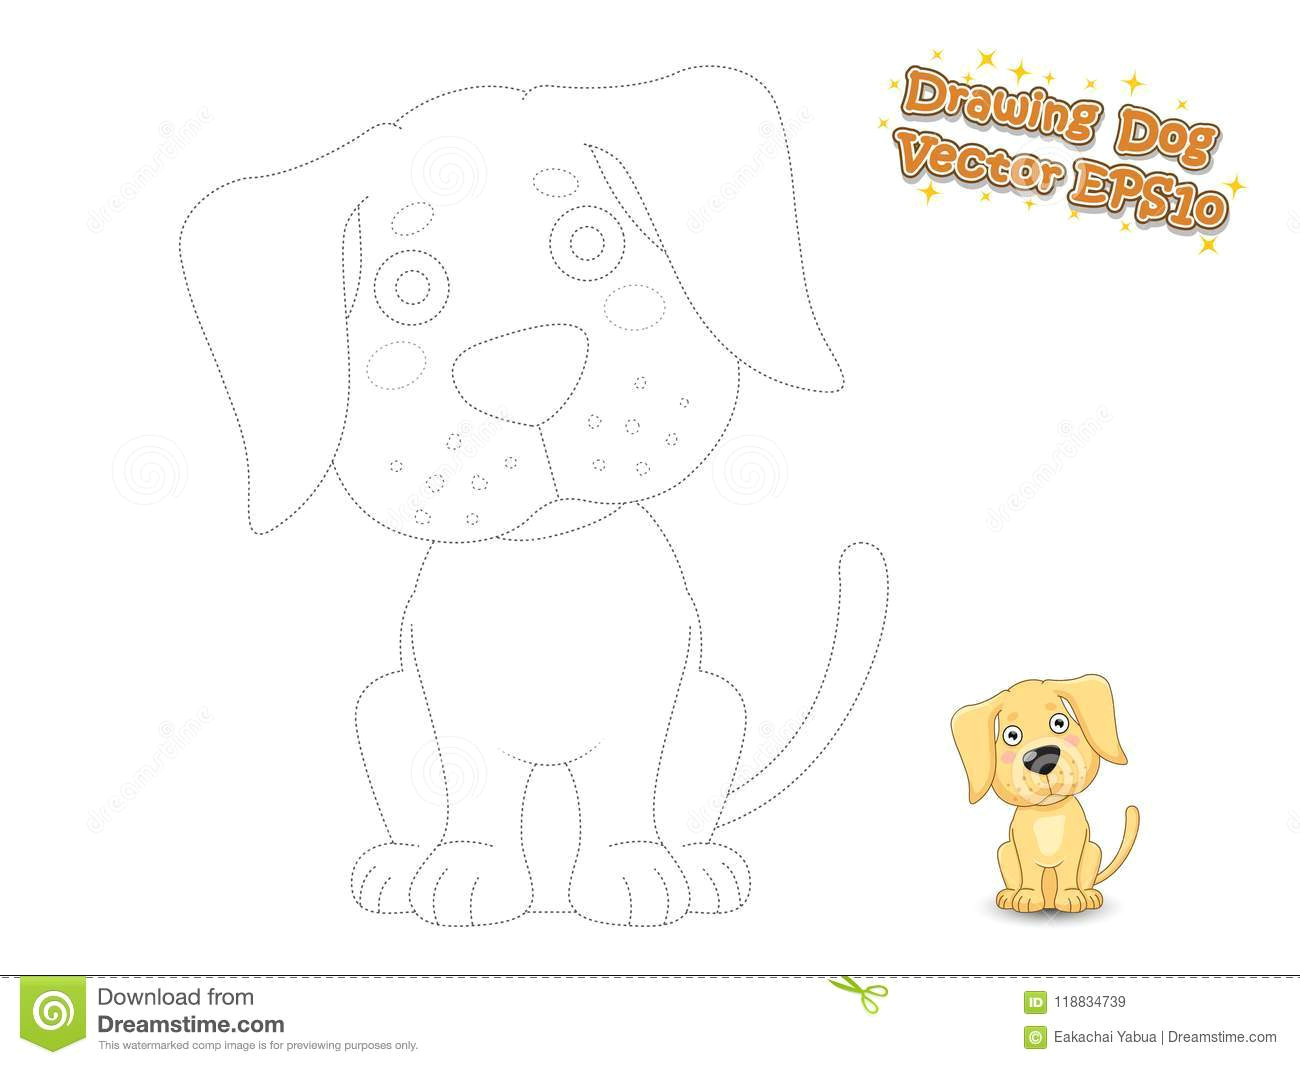 Children S Drawing Of A Dog Drawing and Coloring Cute Cartoon Dog Puppy Labrador Educationa